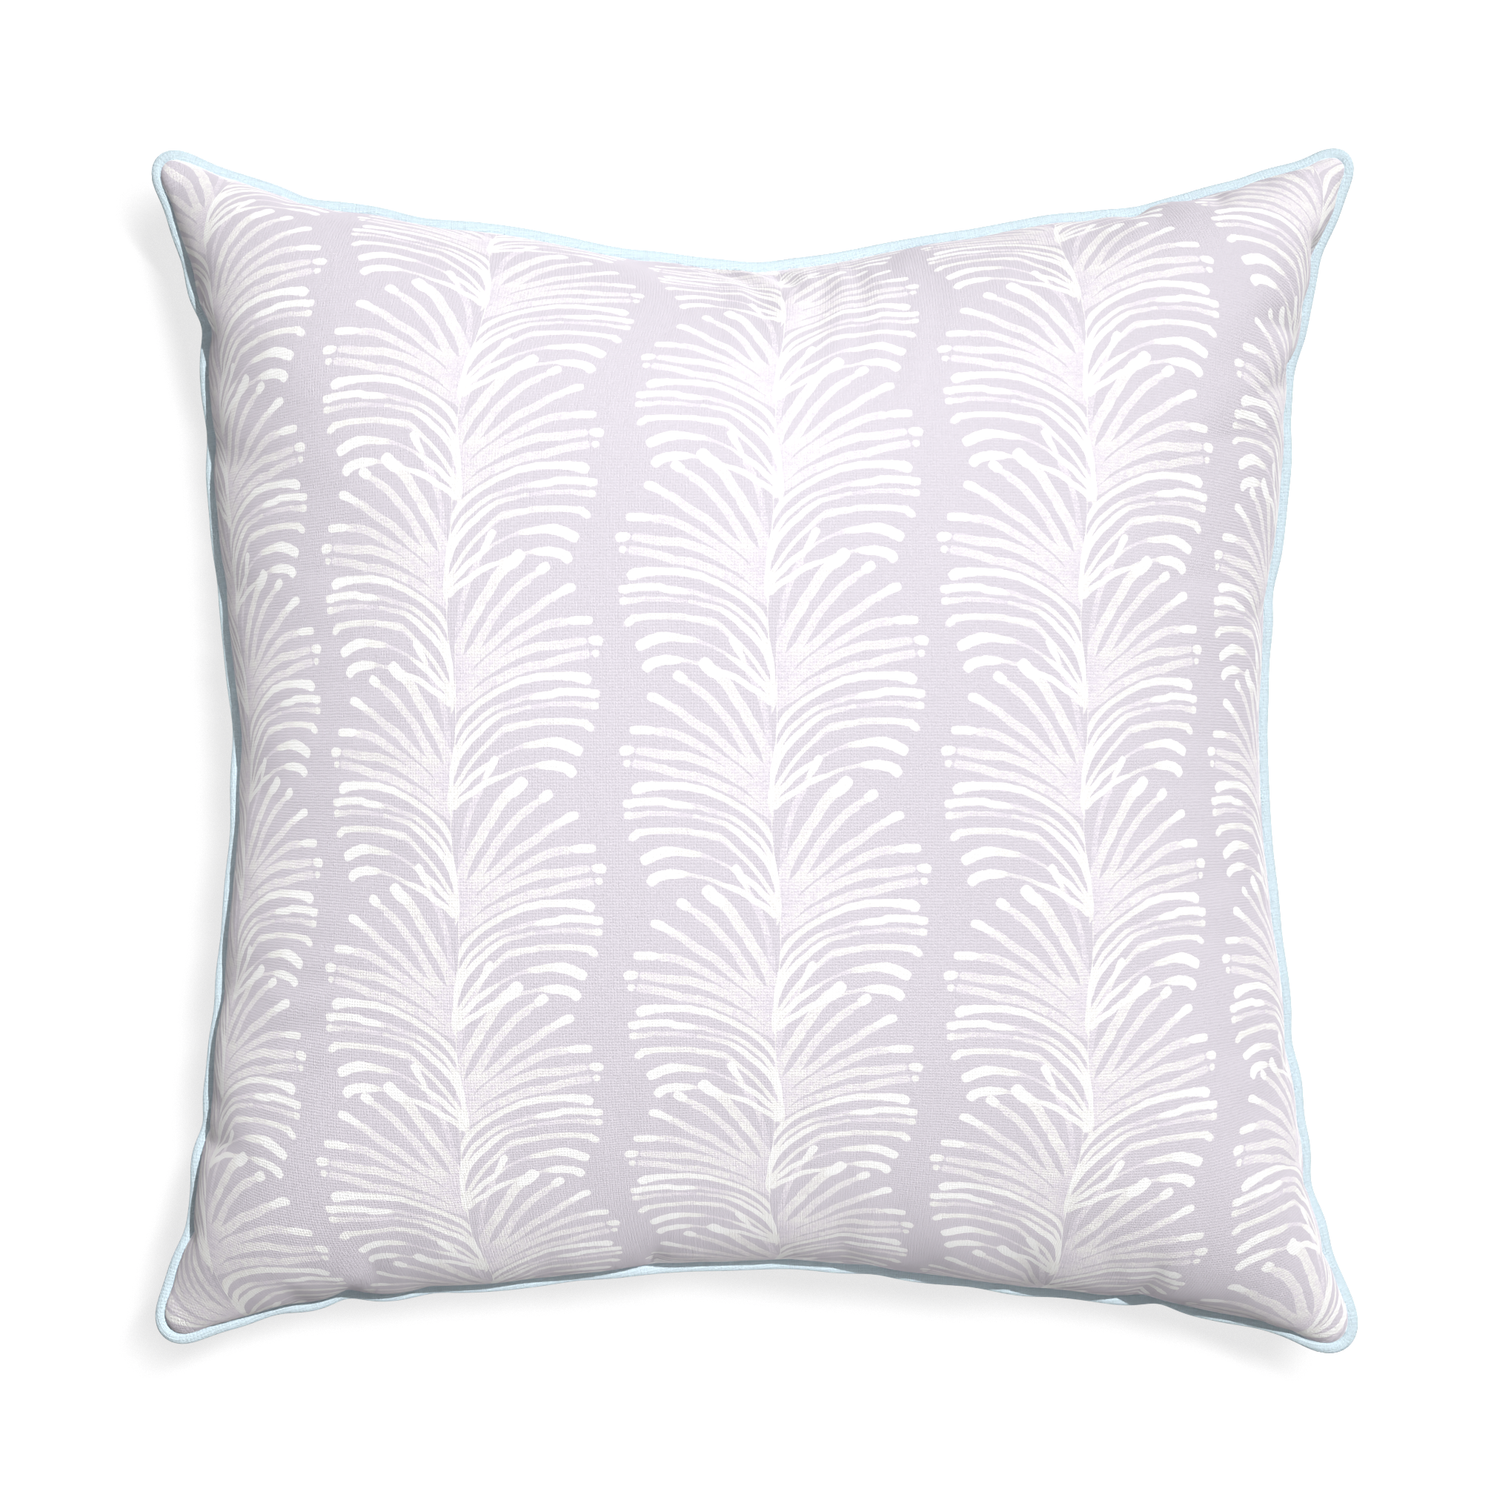 Euro-sham emma lavender custom pillow with powder piping on white background